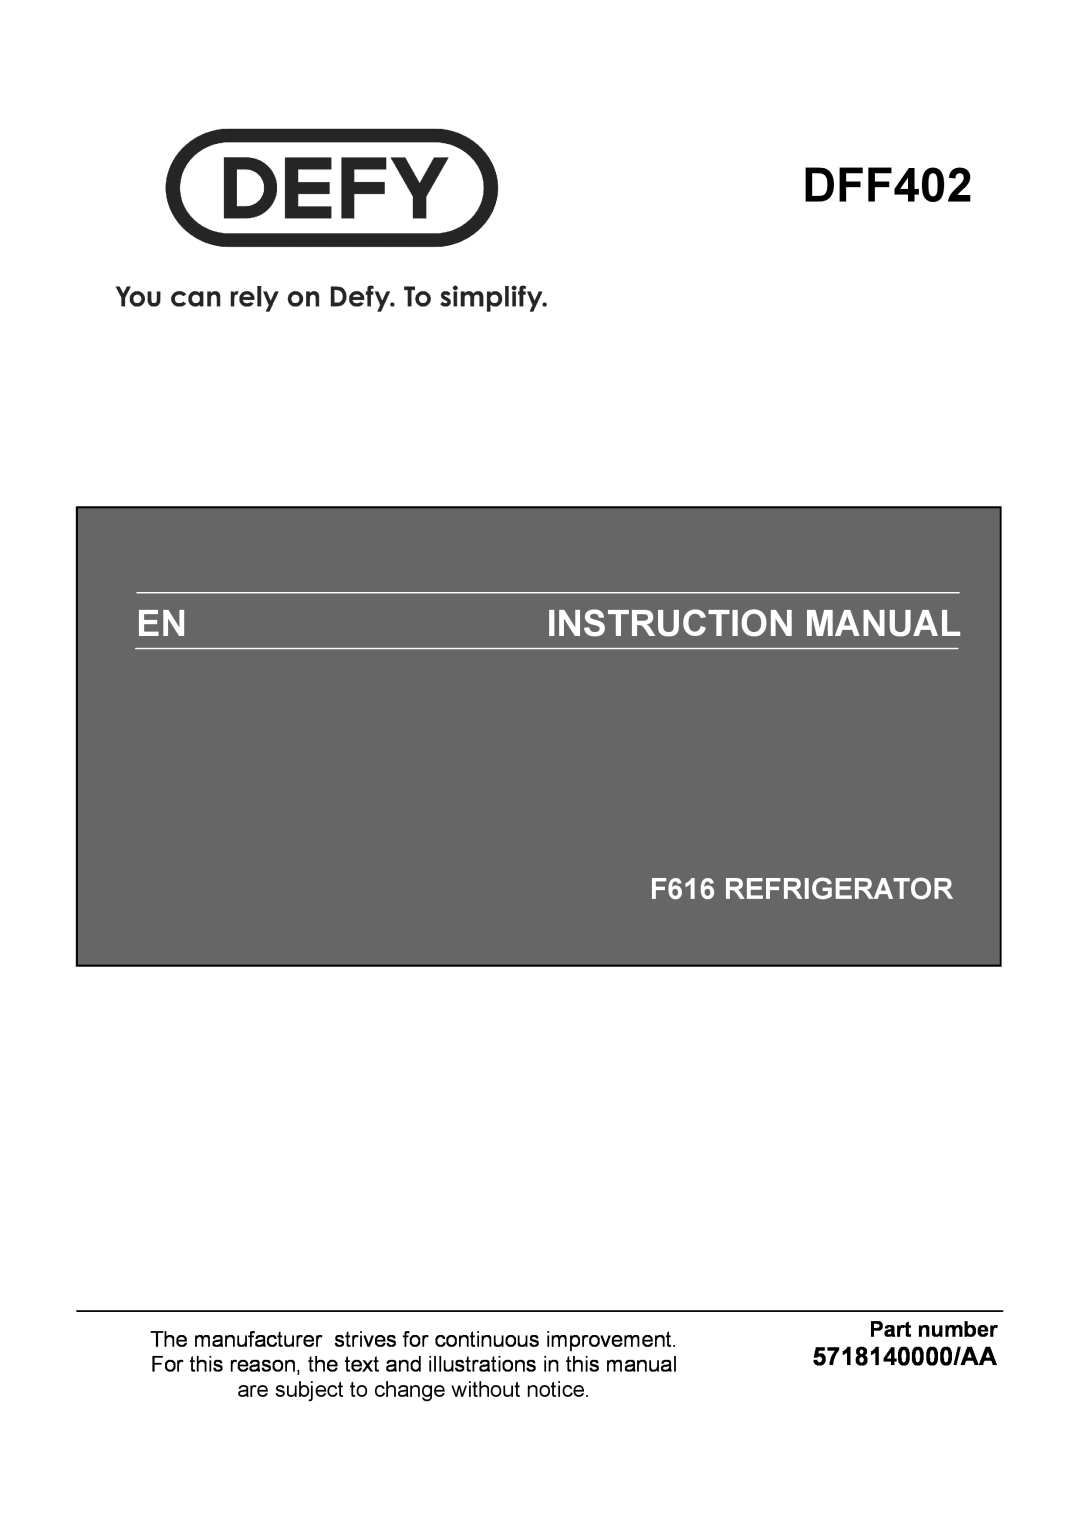 Defy Appliances 5718140000/AA instruction manual DFF402, Instruction Manual, F616 REFRIGERATOR, Part number 